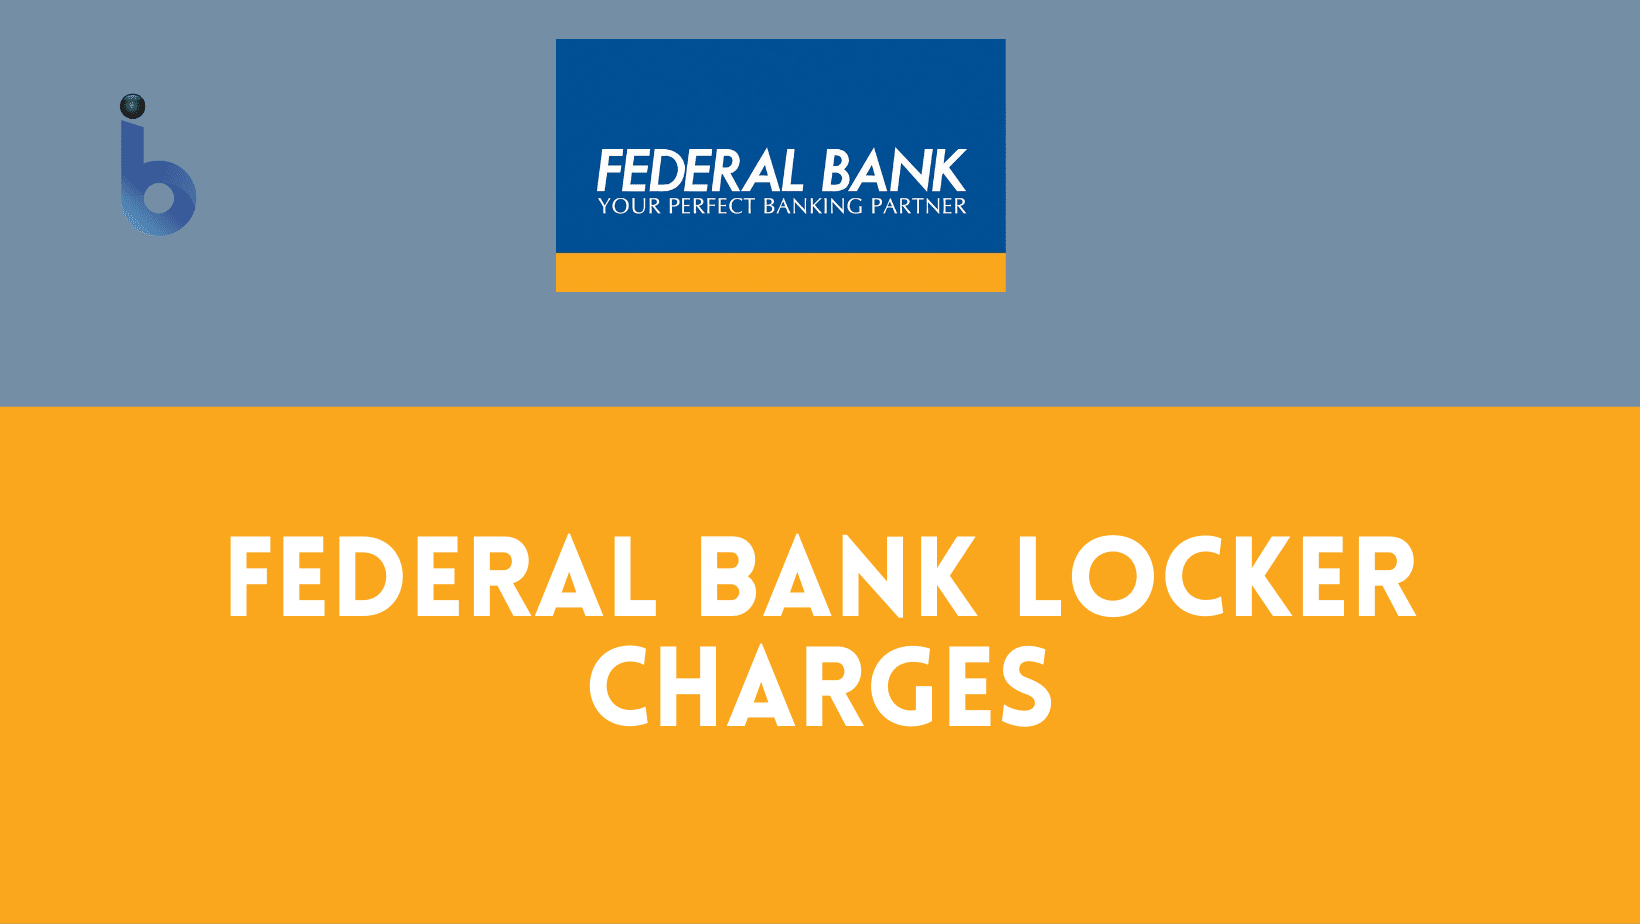 Federal Bank Locker Charges